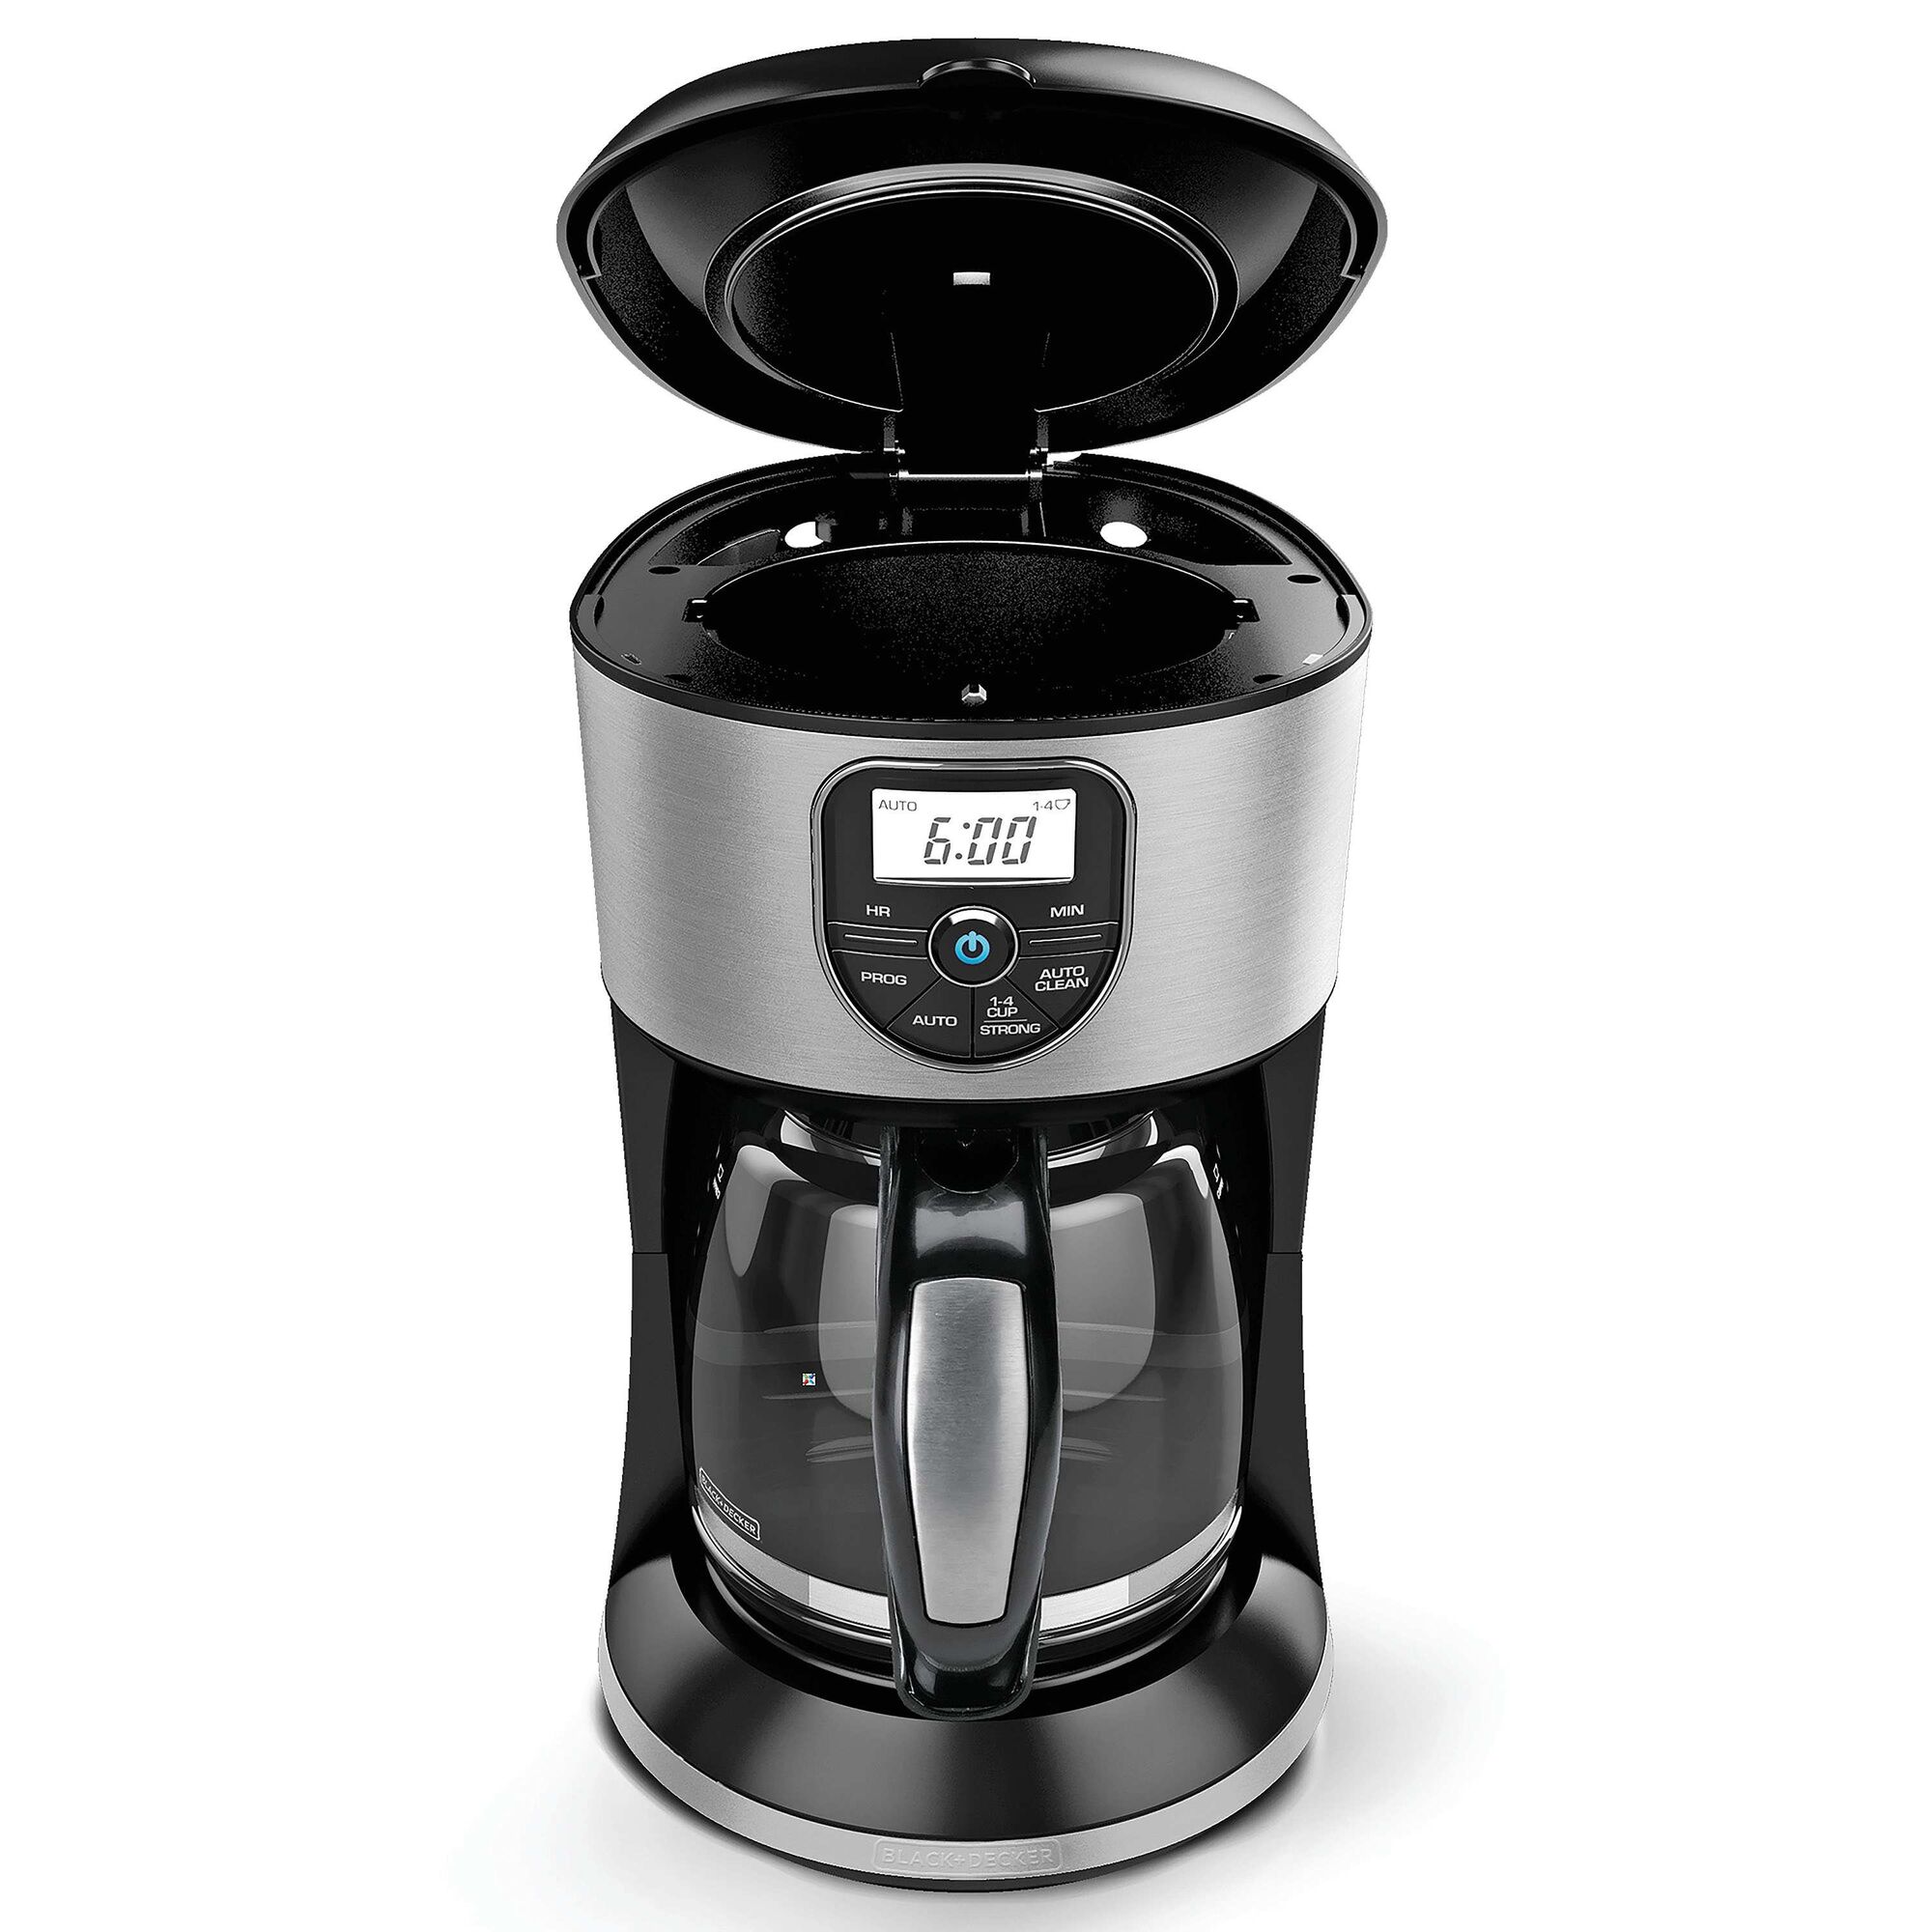 12 Cup programmable coffee maker.